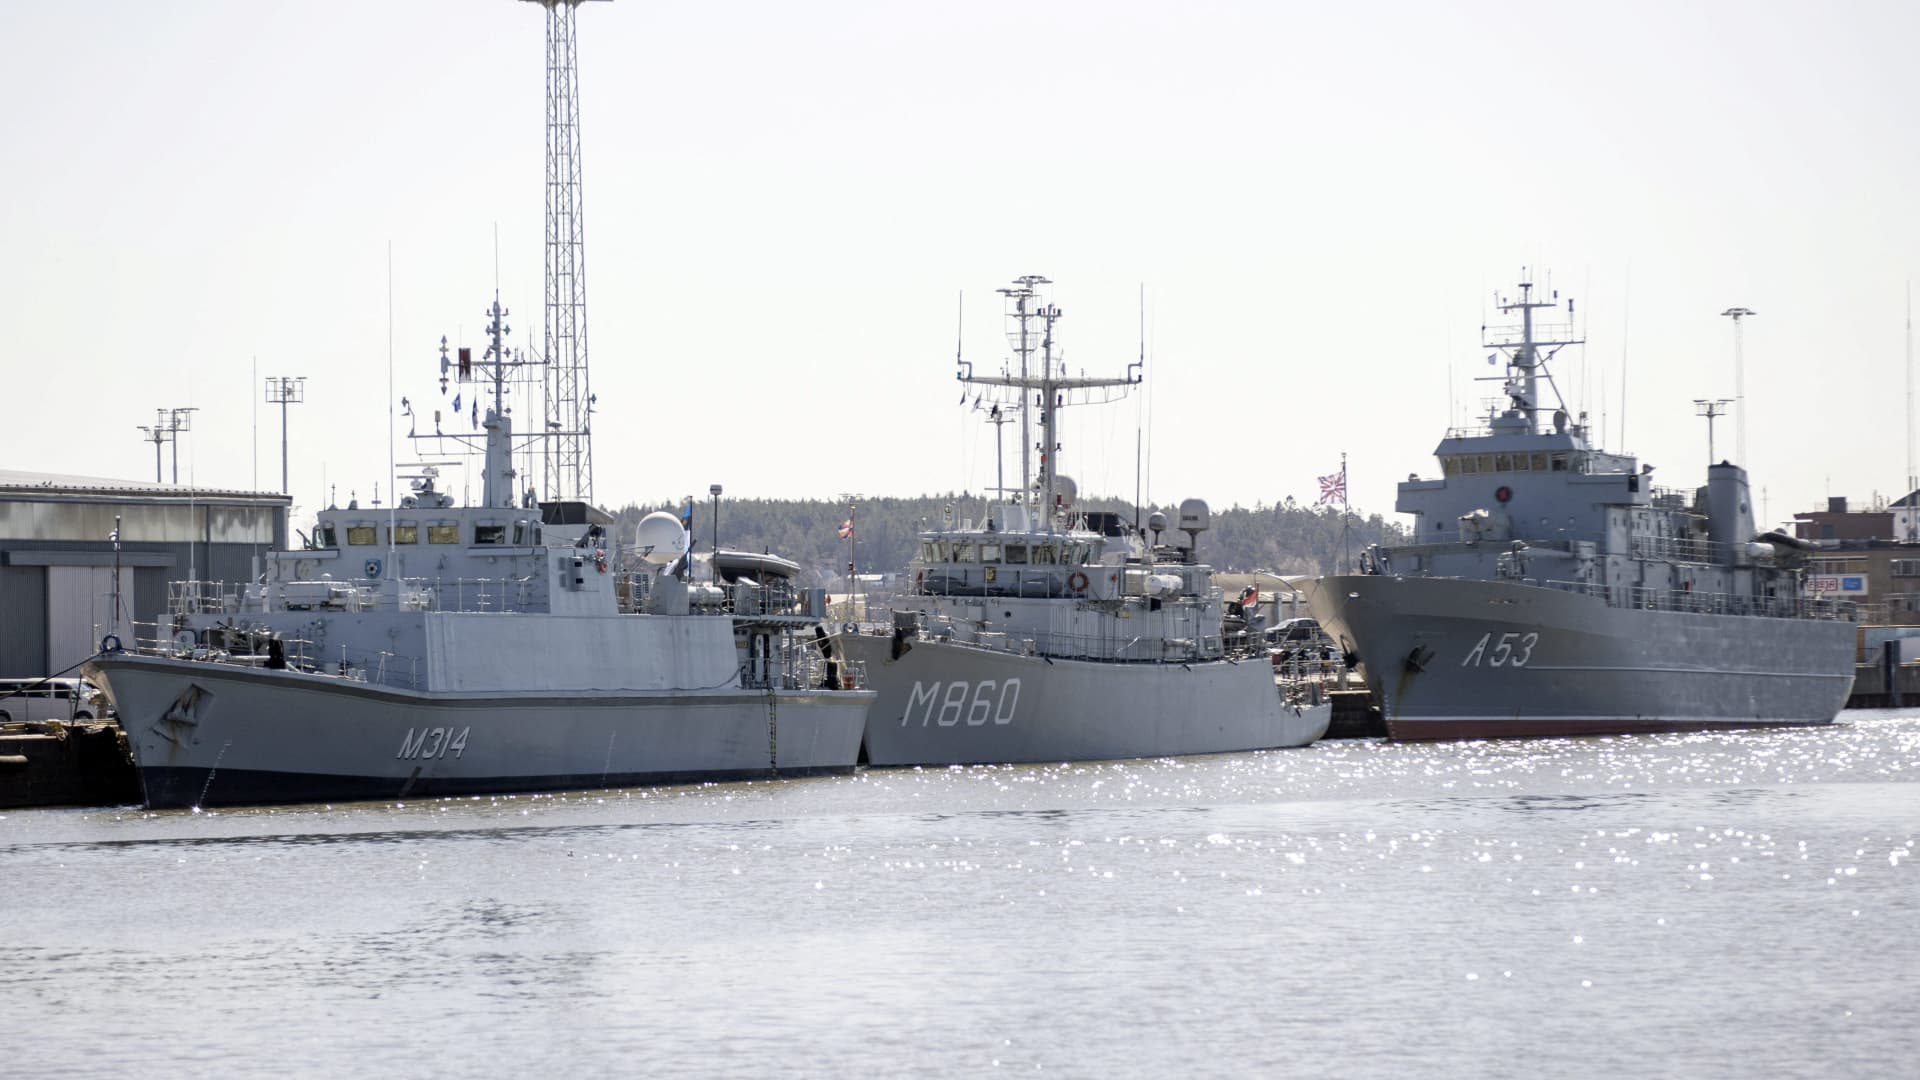 Three NATO warships from the Standing Nato Mine Countermeasures Group 1 (SNMCMG1 group), EML Sakala from Estonia, Dutch HNLMS Schiedam and the flagship LVNS Virsaitis from Latvia, arrive to a harbour, to train with Finland's coastal fleet, in the Finnish southwestern coastal city of Turku, Finland April 25, 2022.